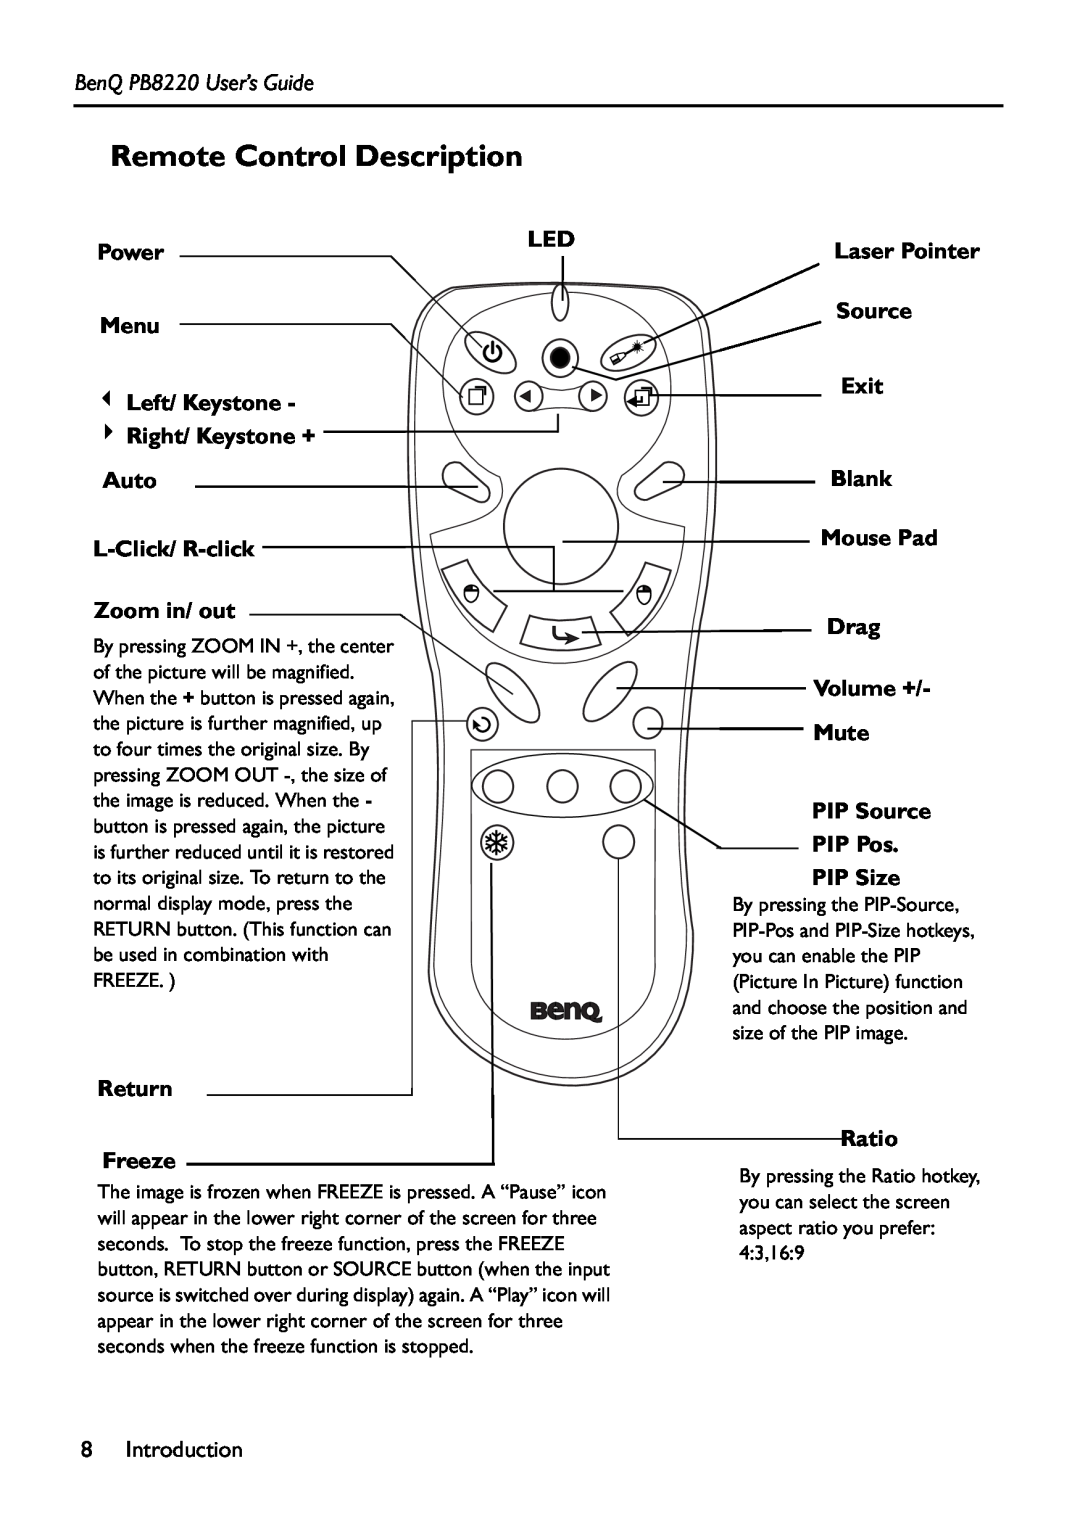 Acer manual Remote Control Description, BenQ PB8220 User’s Guide, Power Menu, Laser Pointer Source, Zoom in/ out, Ratio 